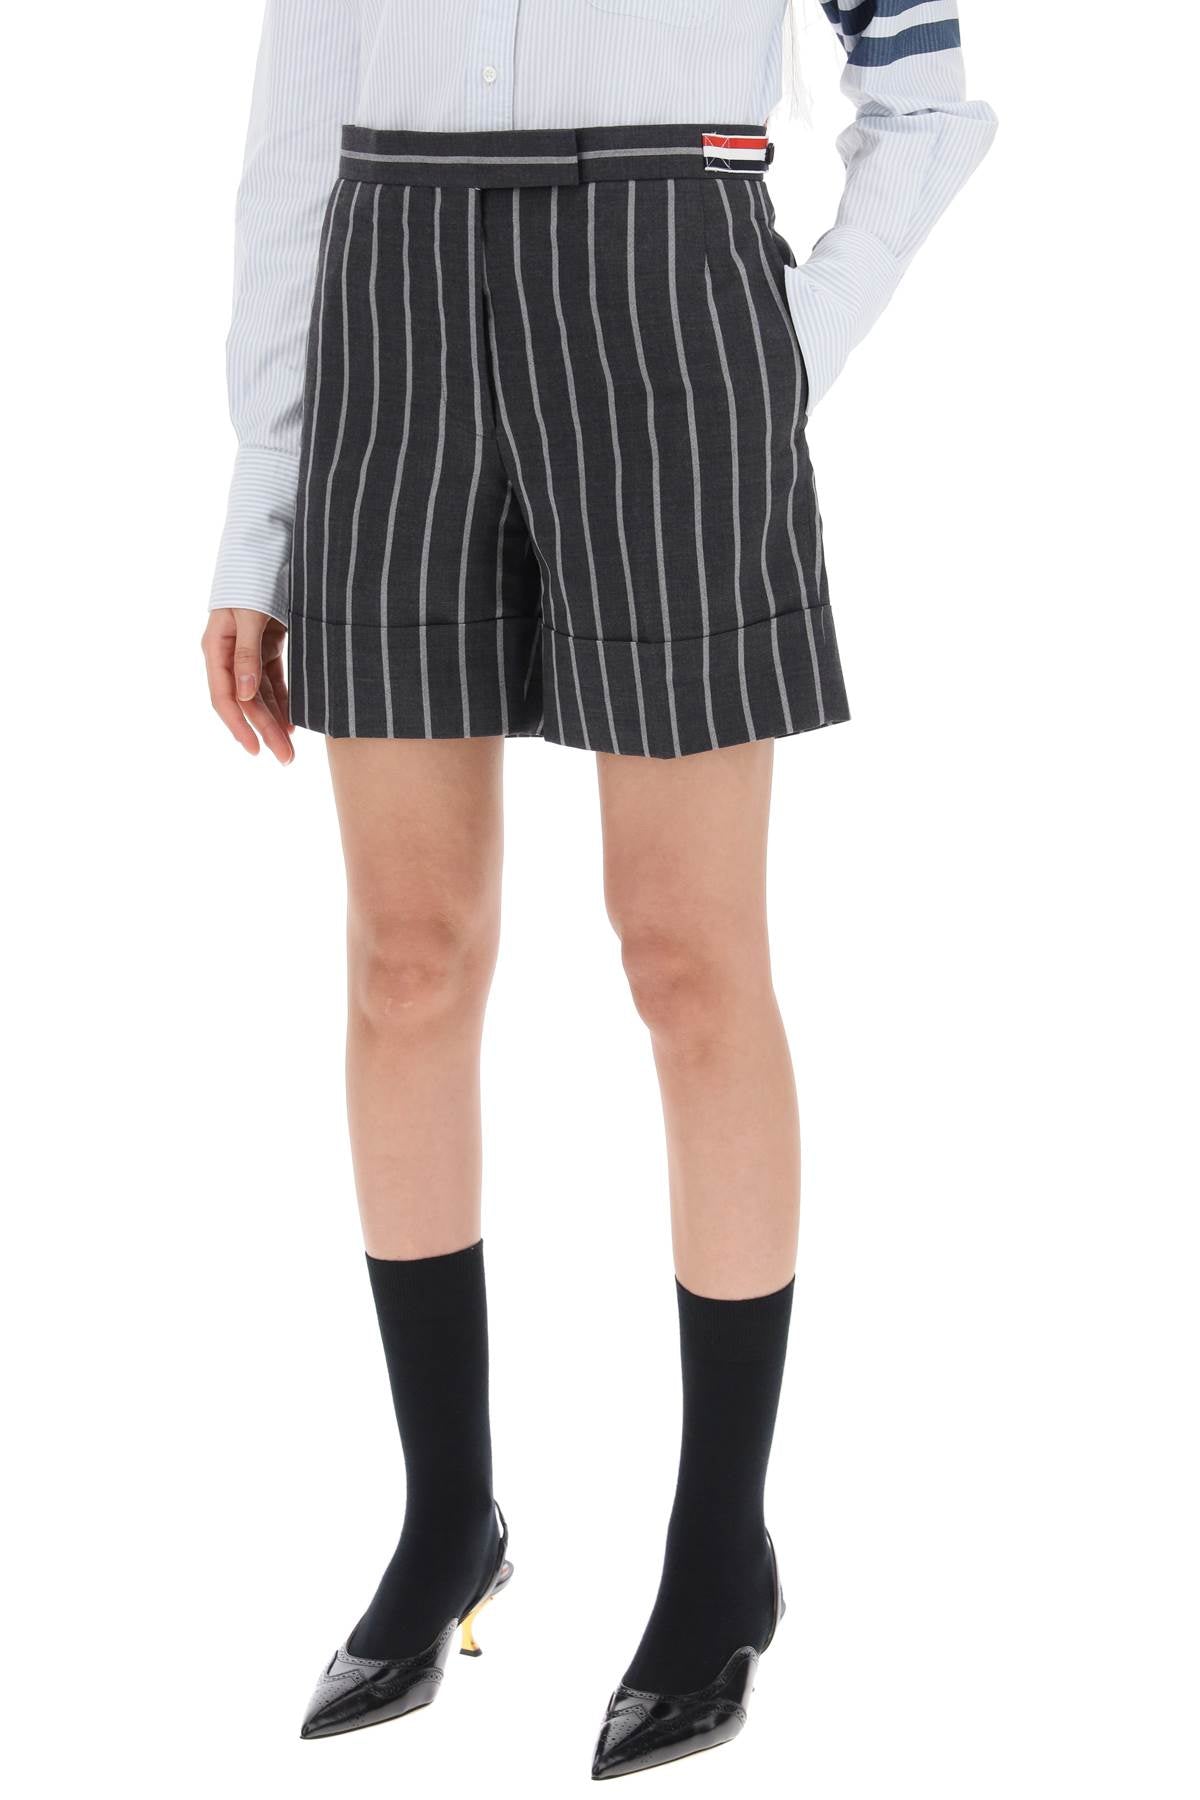 Thom browne striped tailoring shorts-3